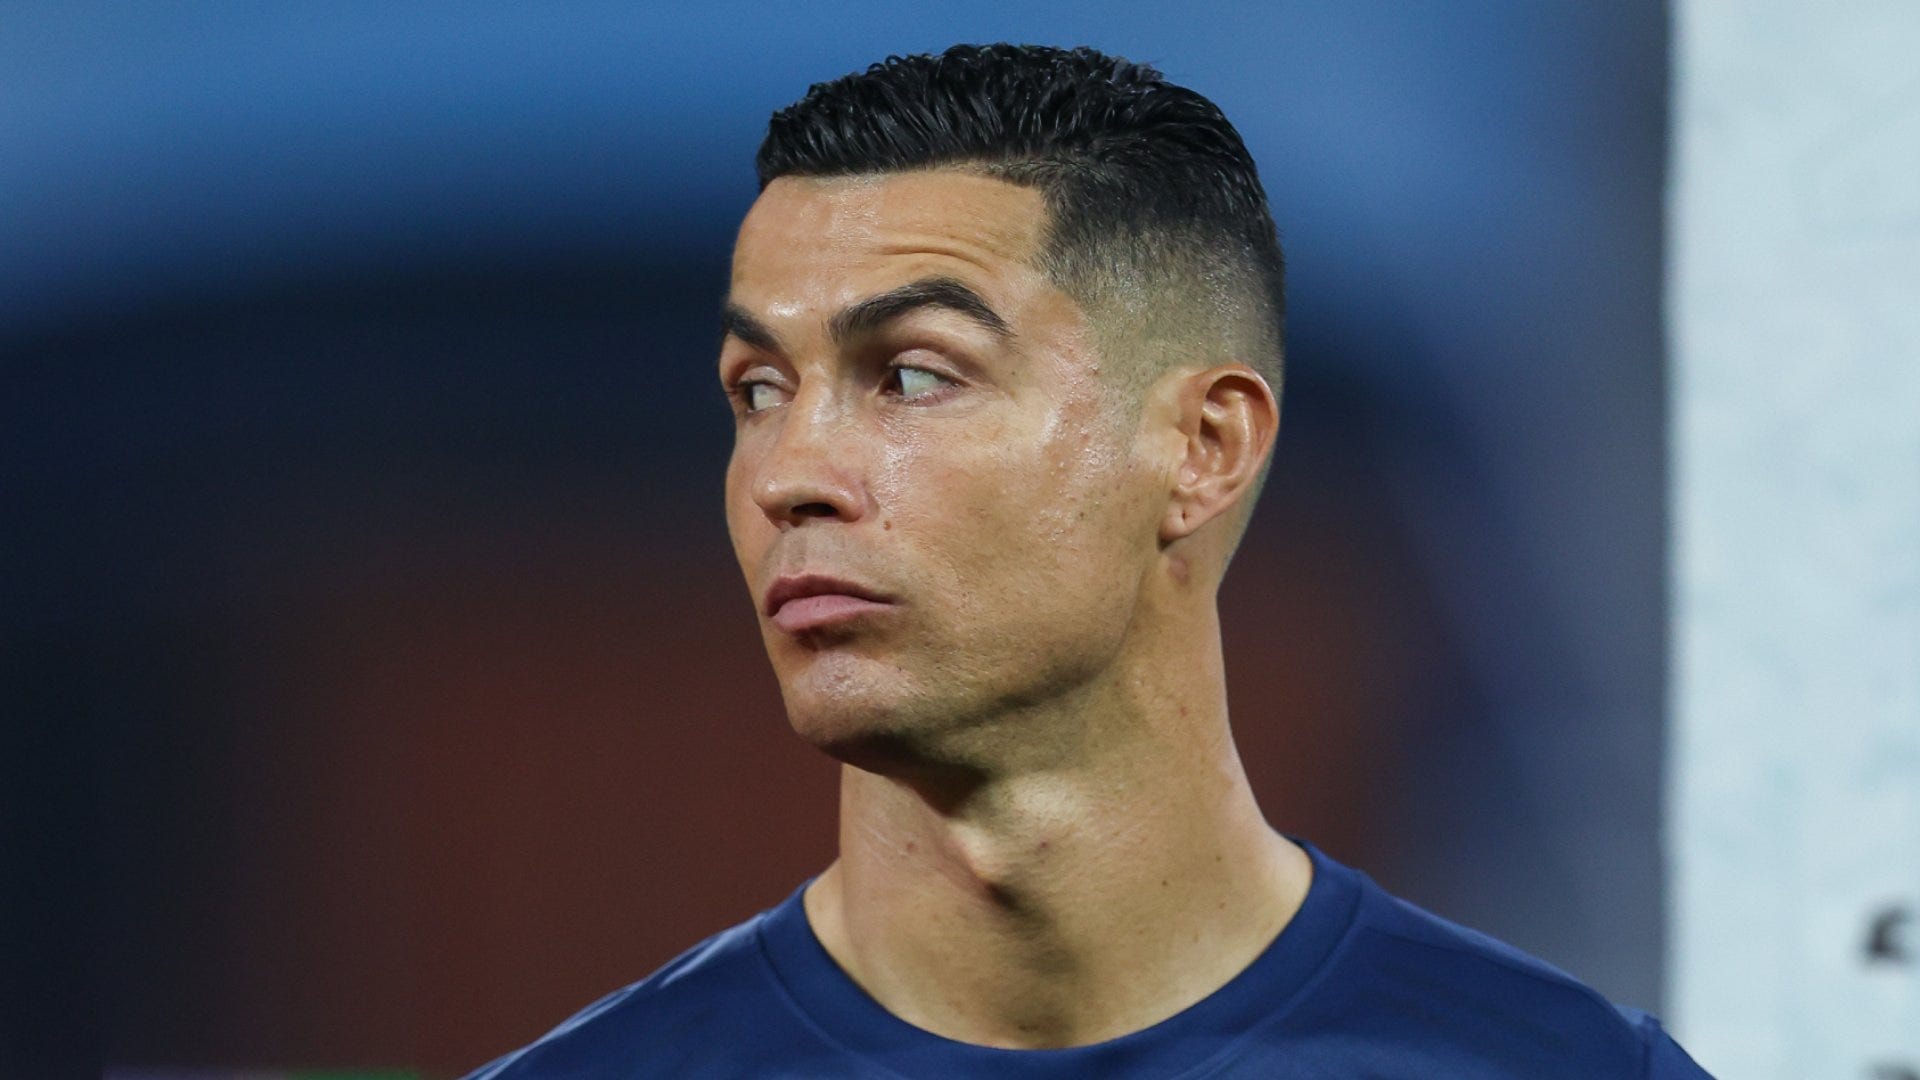 Football News | Cristiano Ronaldo New Look: Juventus Star Shows Off Latest  'Curly Locks' Hairstyle | ⚽ LatestLY